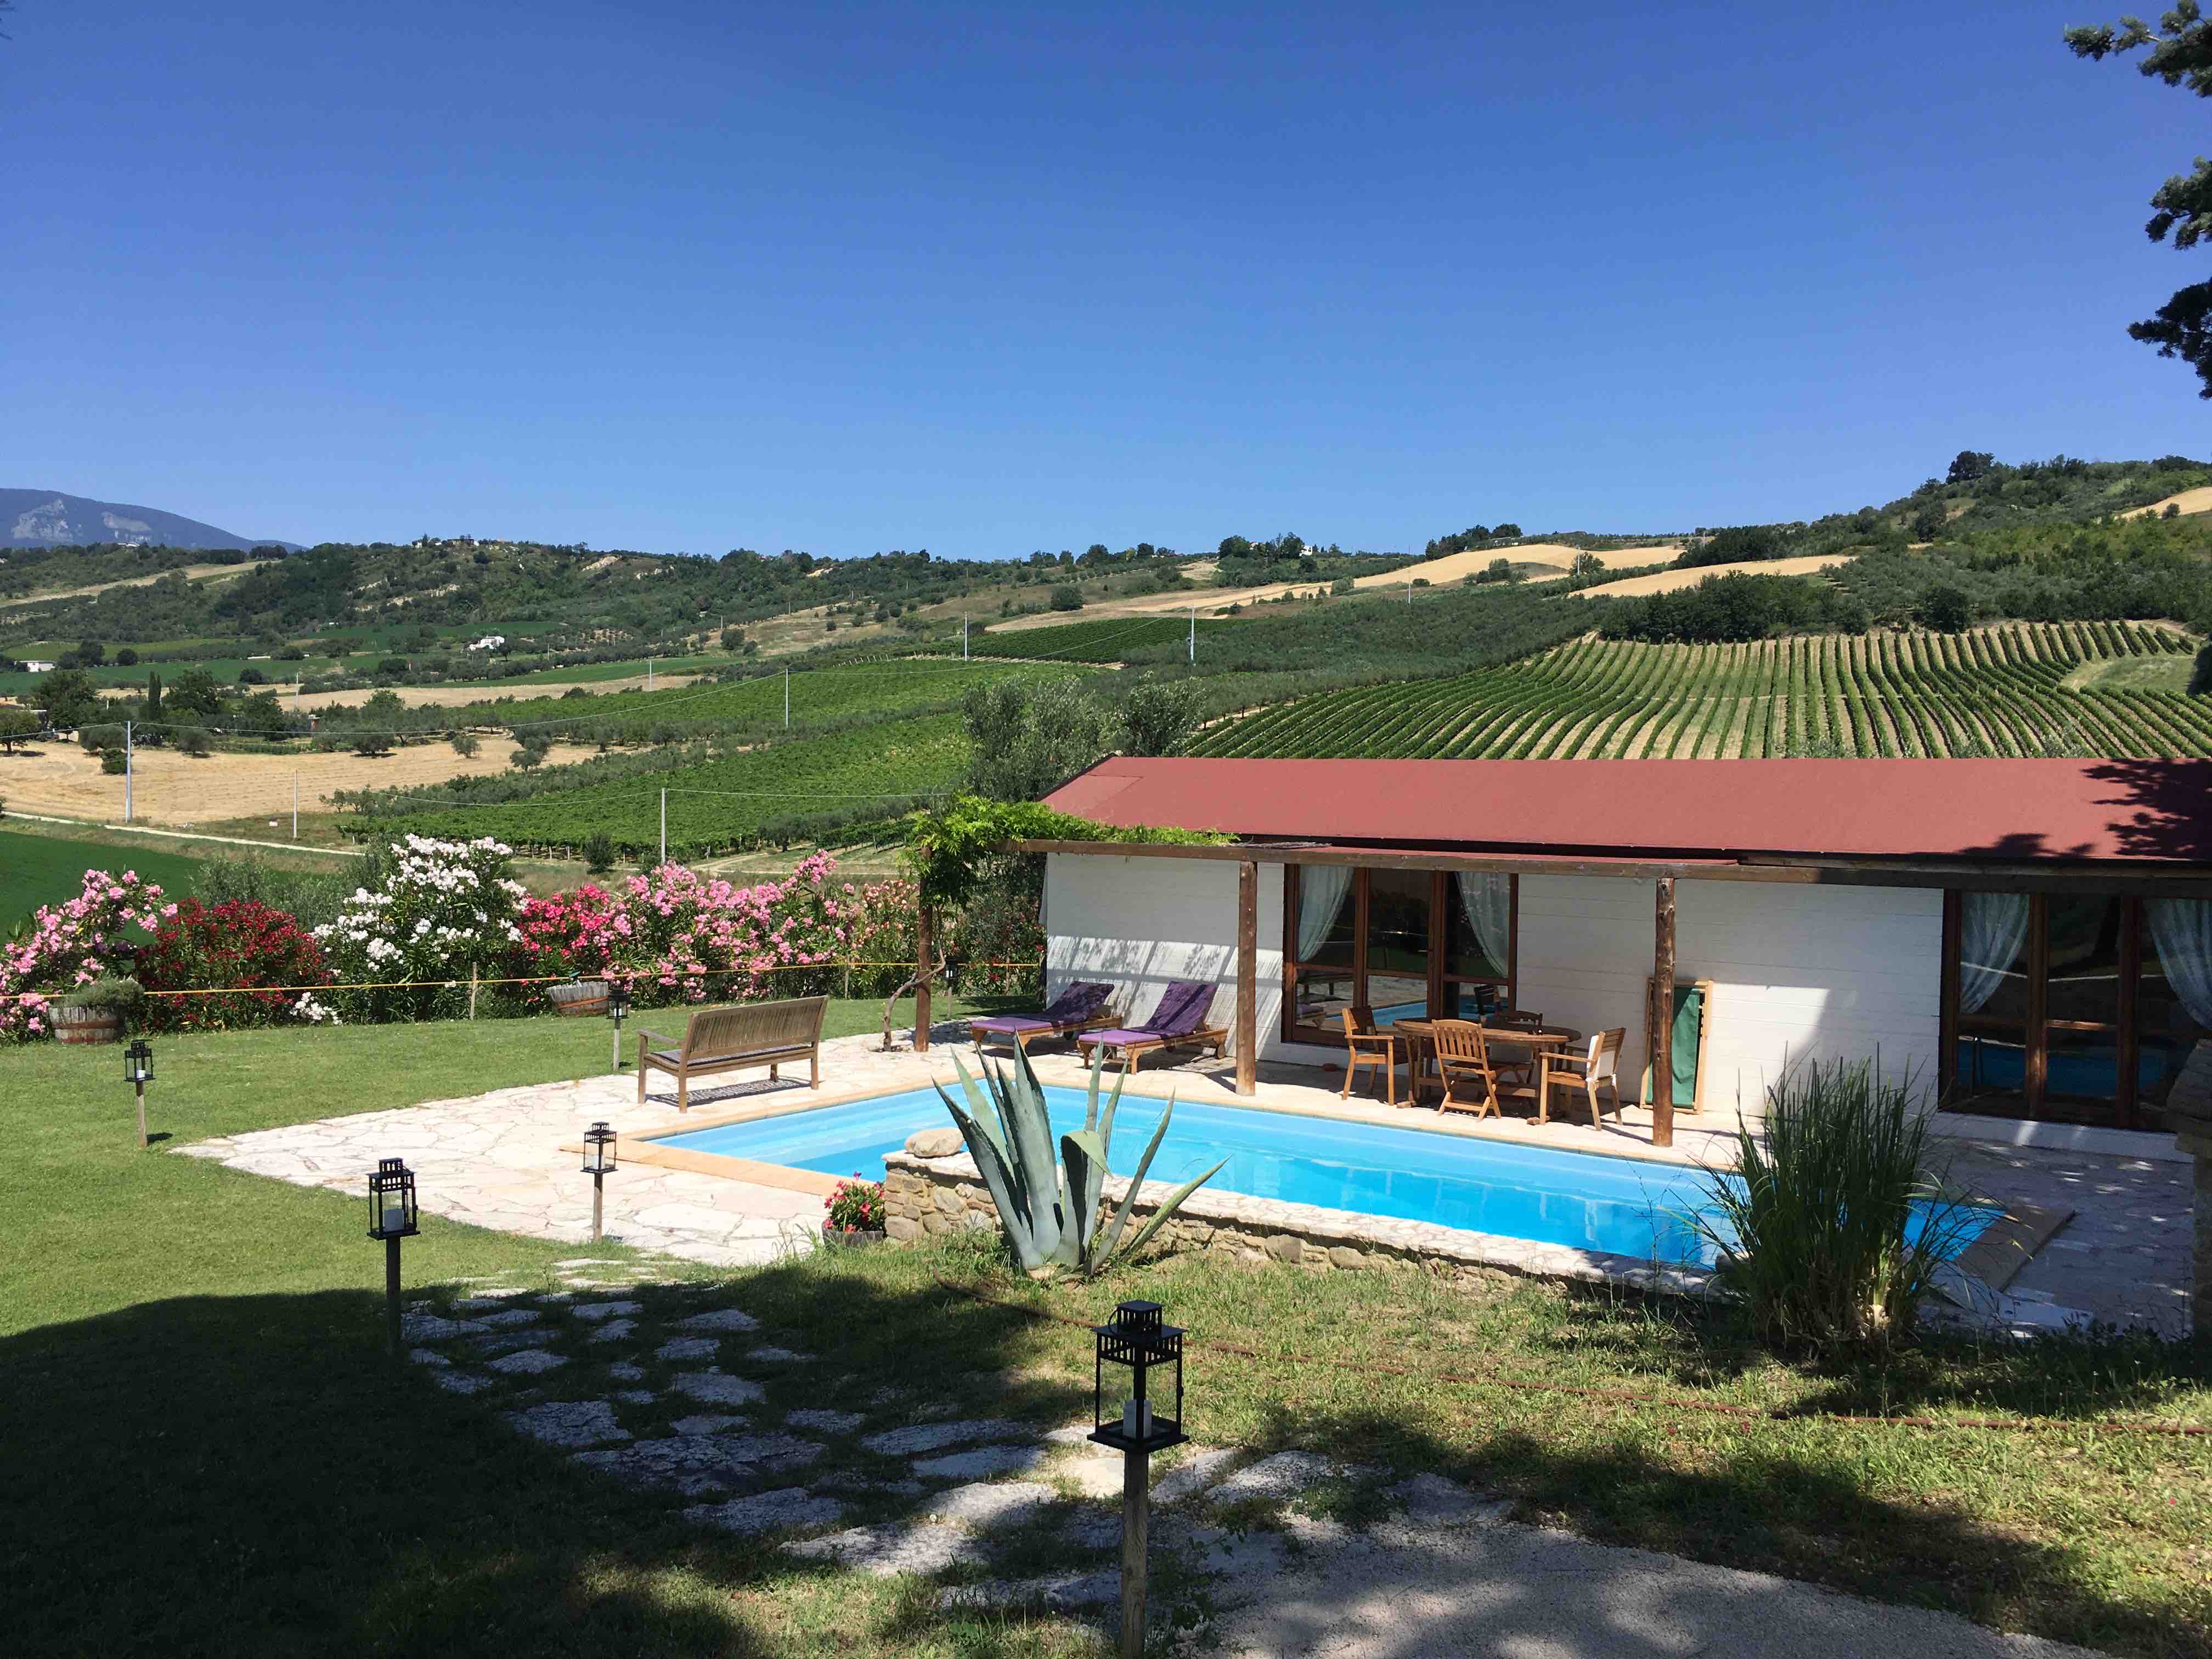 Glamping Abruzzo - The Pool House - Cabins for Rent in Catignano, Pescara,  Italy